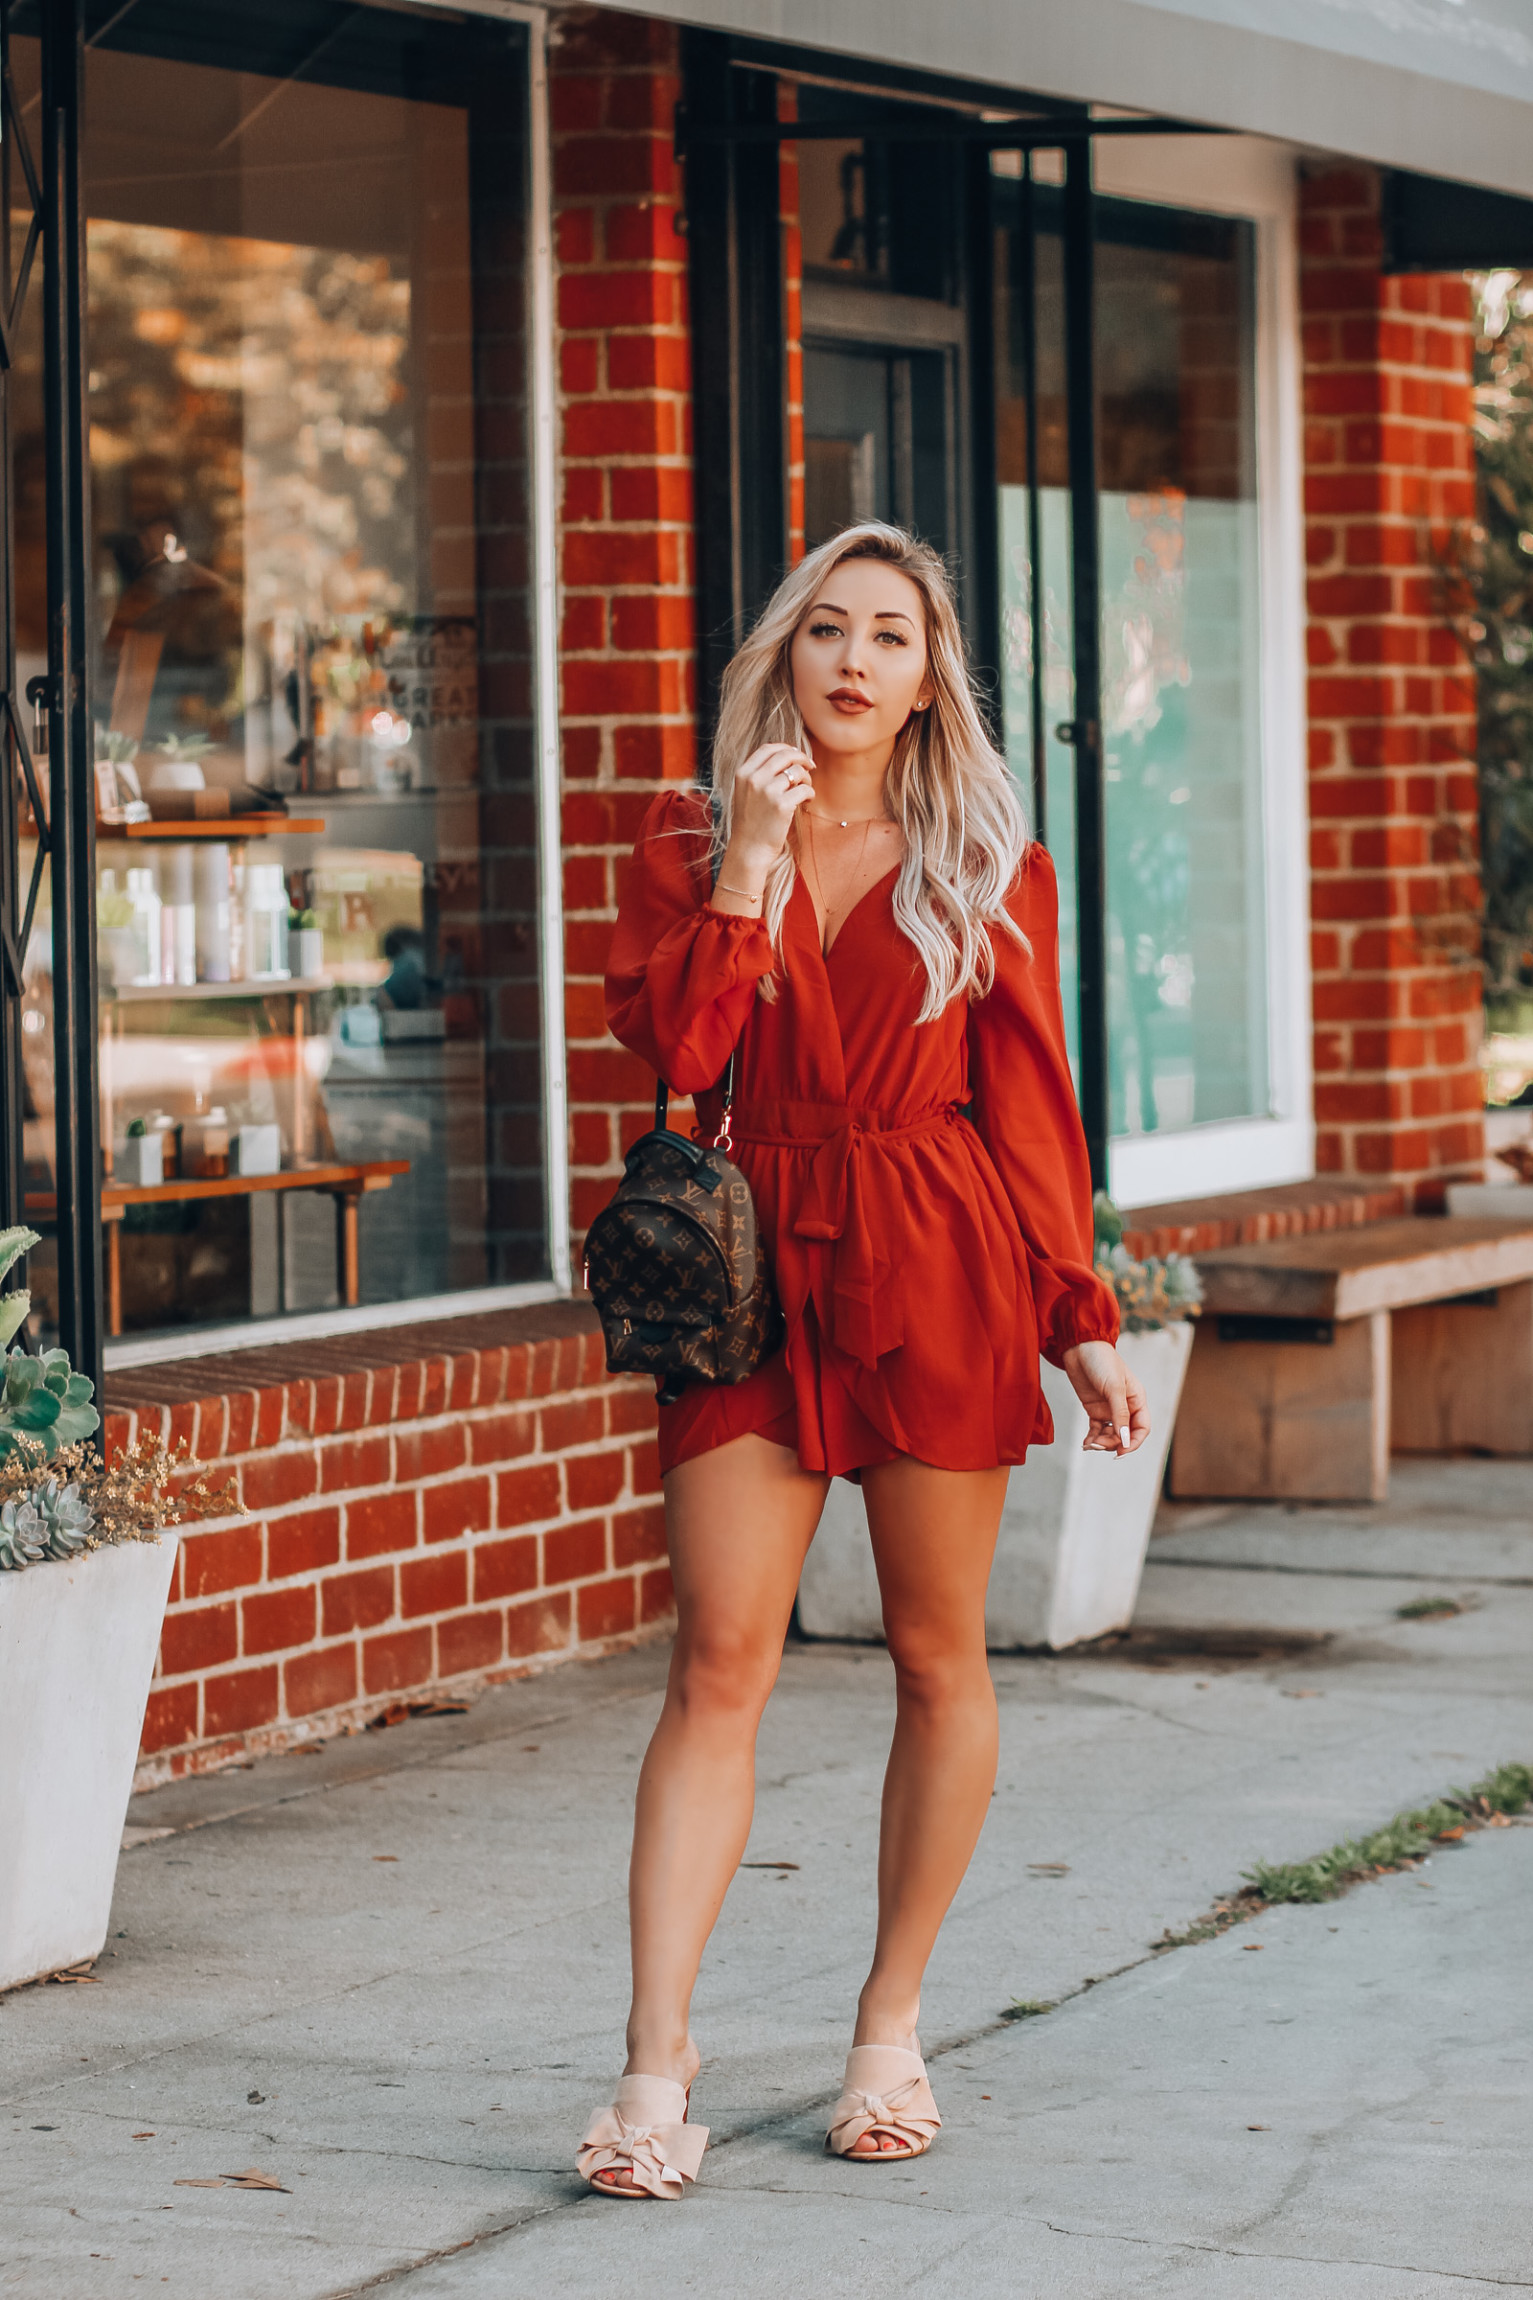 Flowy Chiffon Romper @FashionNova | Louis Vuitton Palm Springs Backpack Mini | Summer Style | Blondie in the City by Hayley Larue